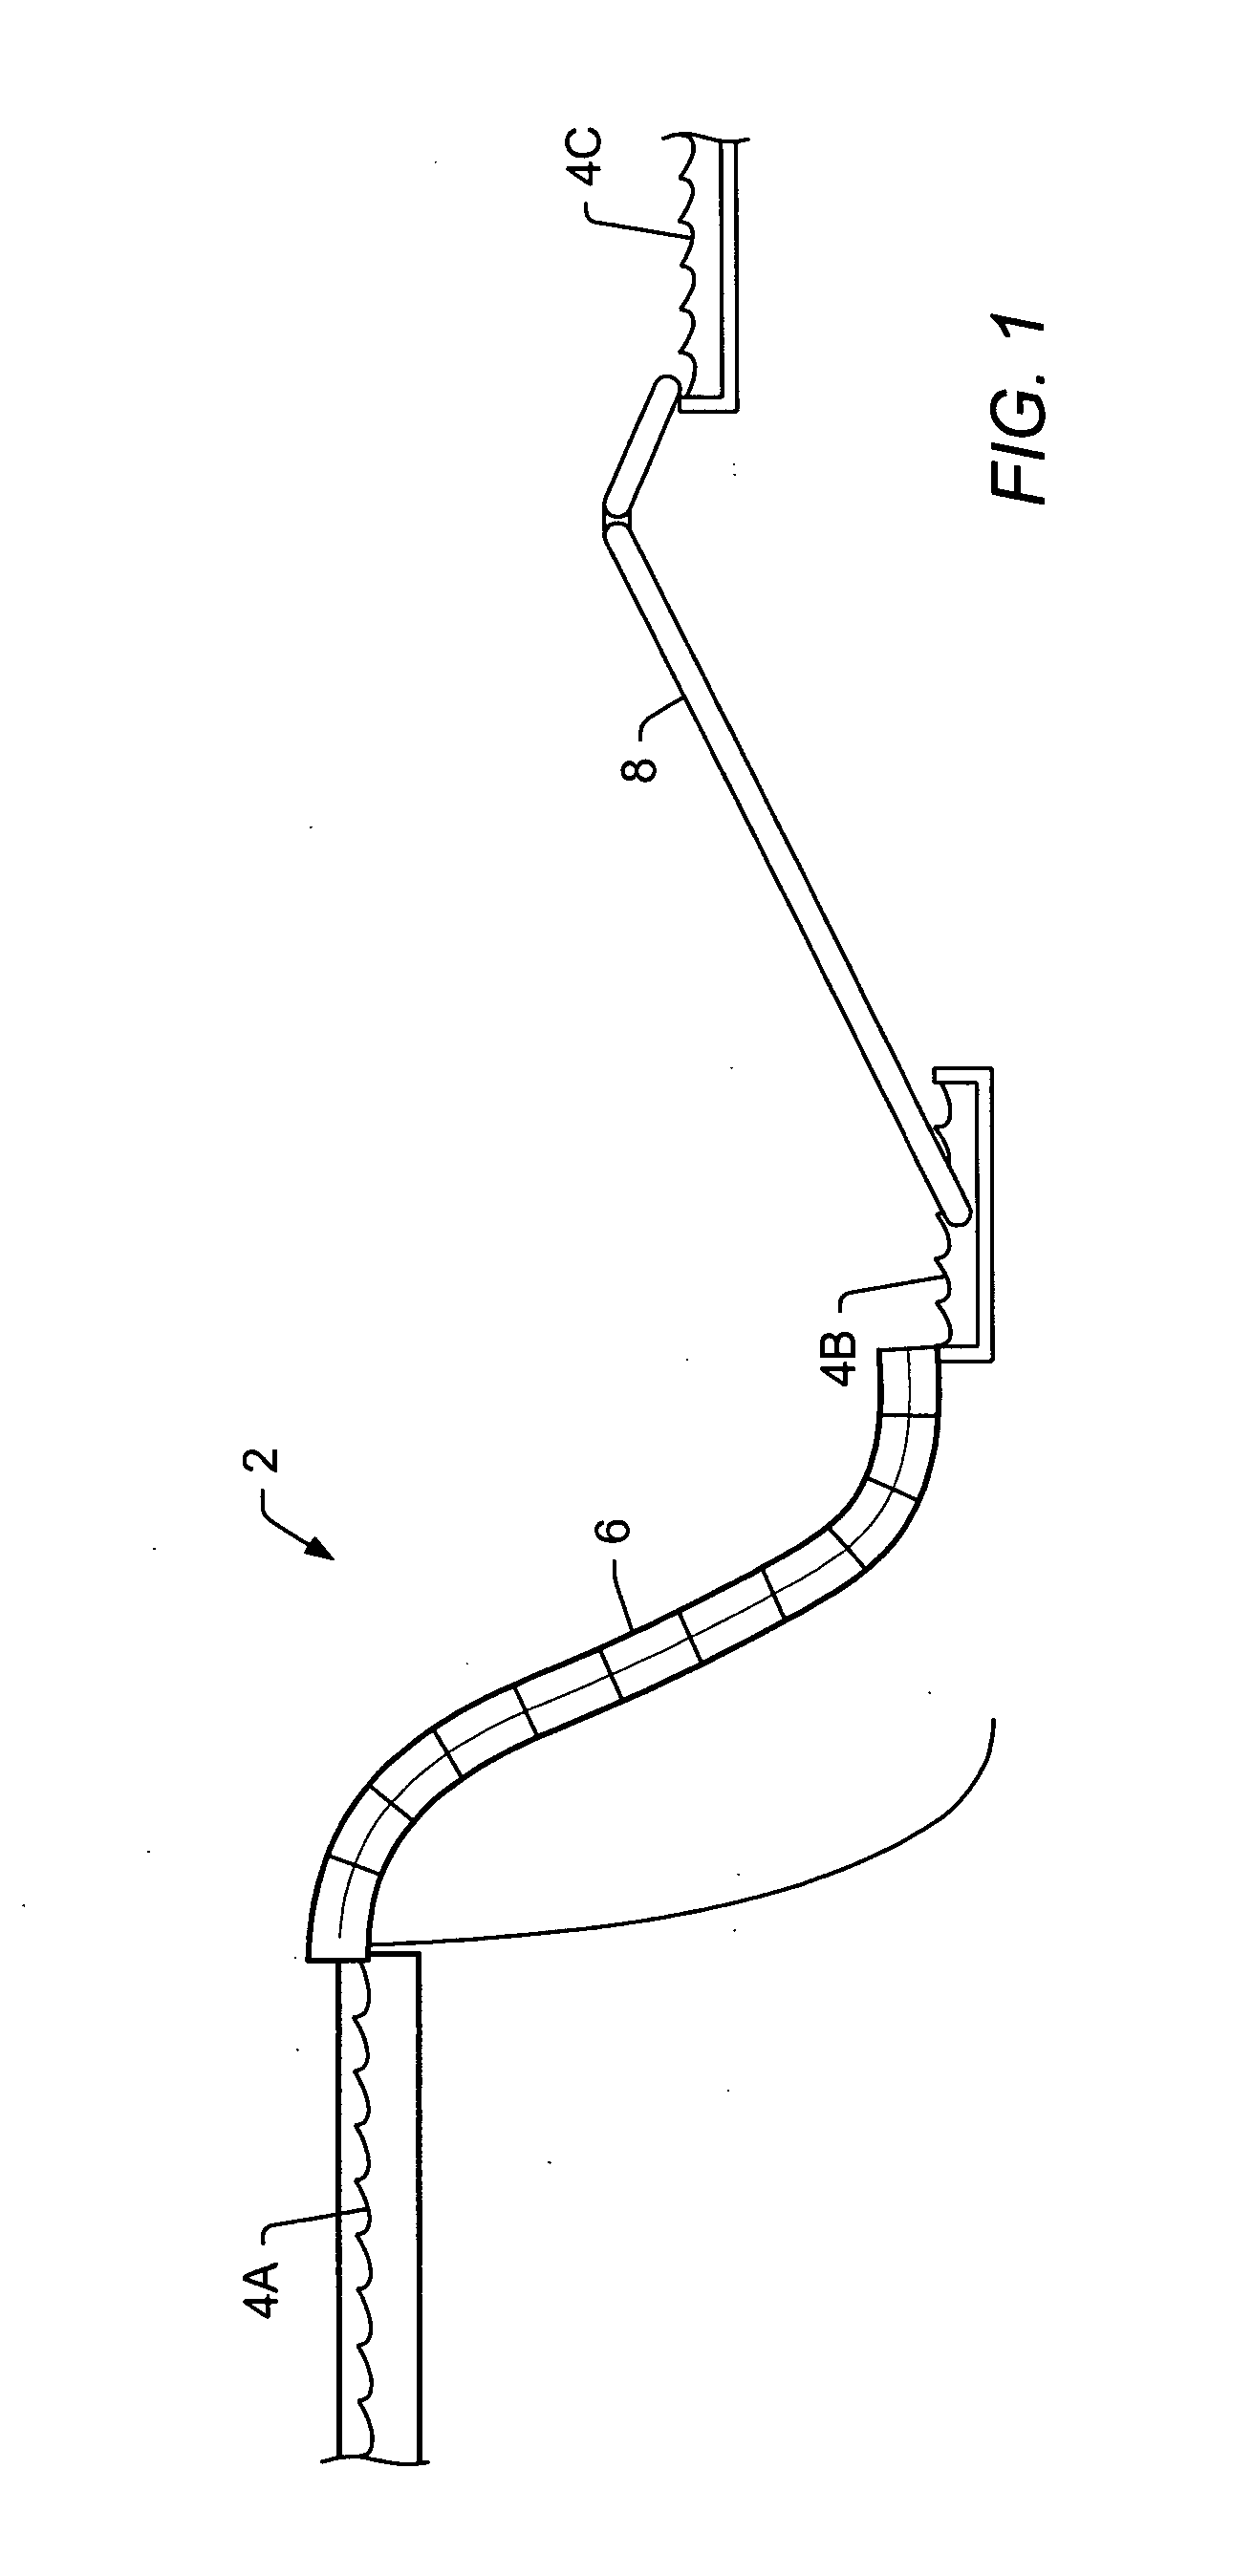 Method and system of positionable covers for water amusement parks